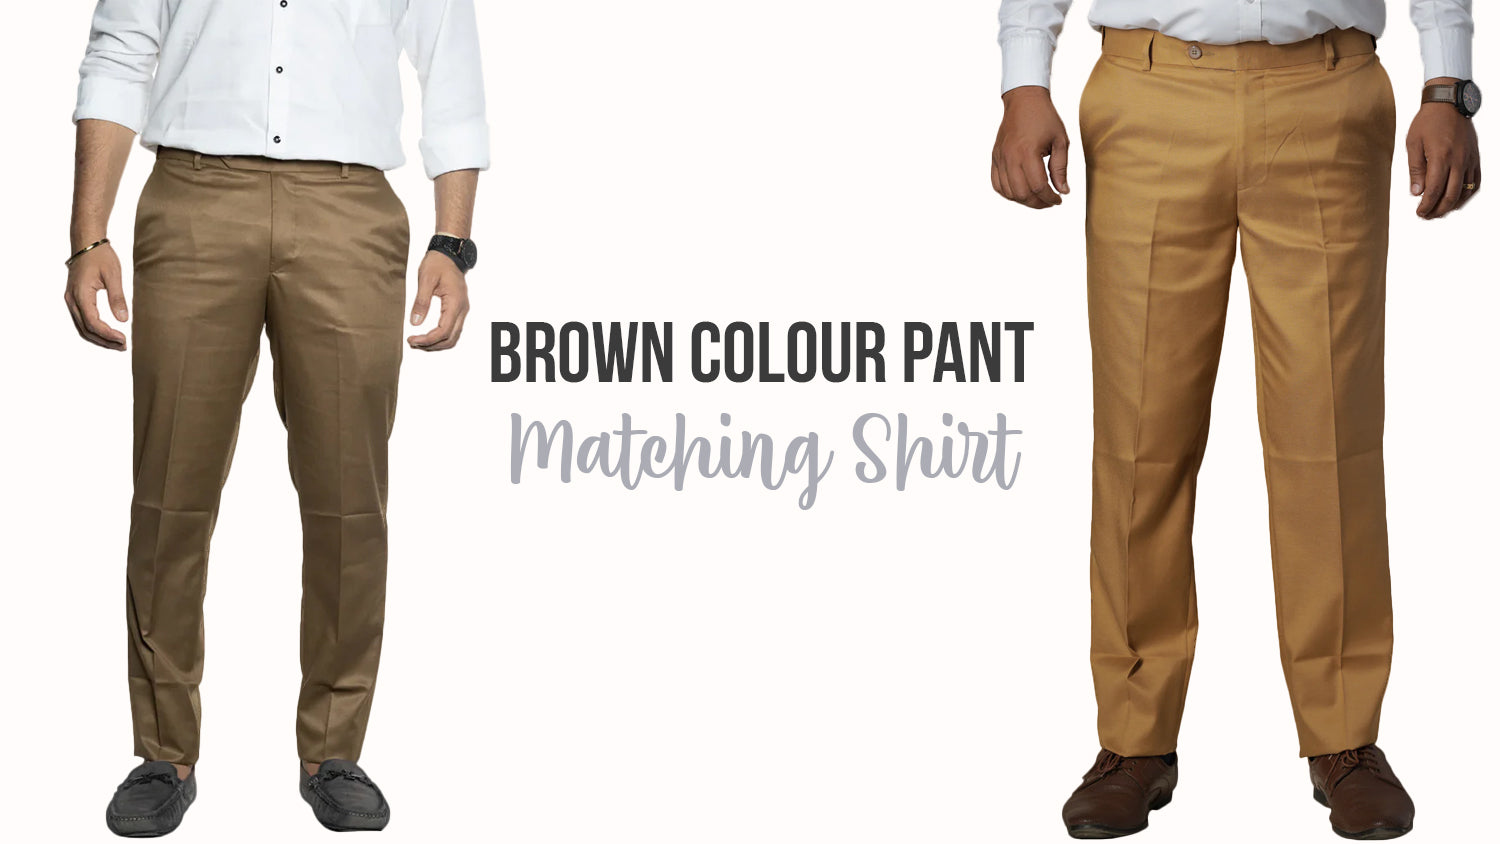 LOFTY THE PERFECT MATCH Slim Fit Men Khaki Trousers - Buy LOFTY THE PERFECT  MATCH Slim Fit Men Khaki Trousers Online at Best Prices in India |  Flipkart.com